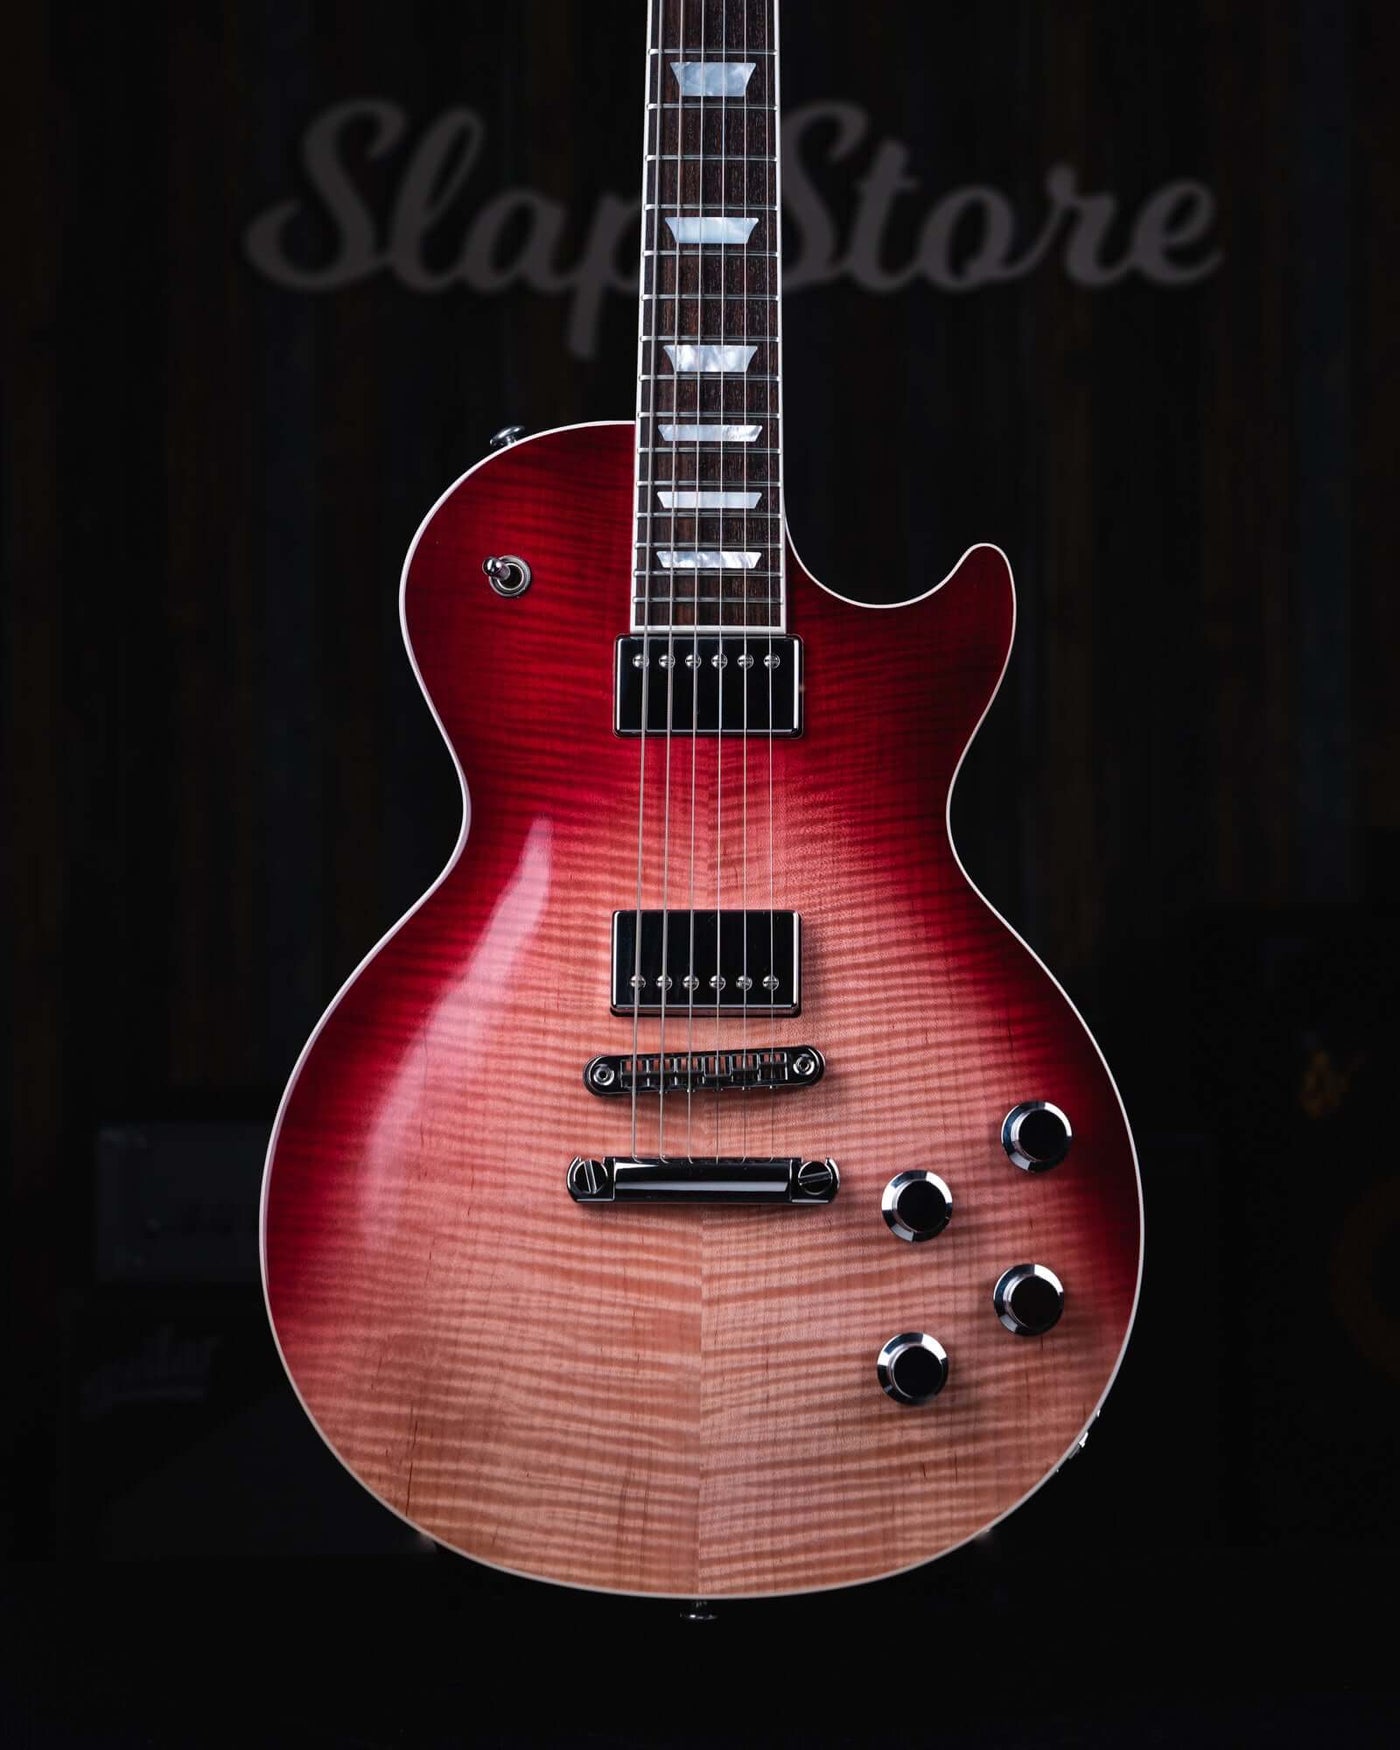 Gibson Les Paul High Performance Hot Pink Shade 2018 - $4399990 - Gearhub - The Gibson ES-325 is a thinline hollowbody electric guitar model produced by the Gibson Guitar Corporation from 1972 to 1979. Although similar in appearance to the popular Gibson ES-335 semi-hollow guitar, the ES-325 was a significantly different guitar in construction and sound. Cuerpo • Modelo: Les Paul• Madera: AAA+ Figured Maple Top with Mahogany Body • Terminación: Gloss Nitrocellulose Lacquer Brazo • Madera: Mahogany• Perfil: